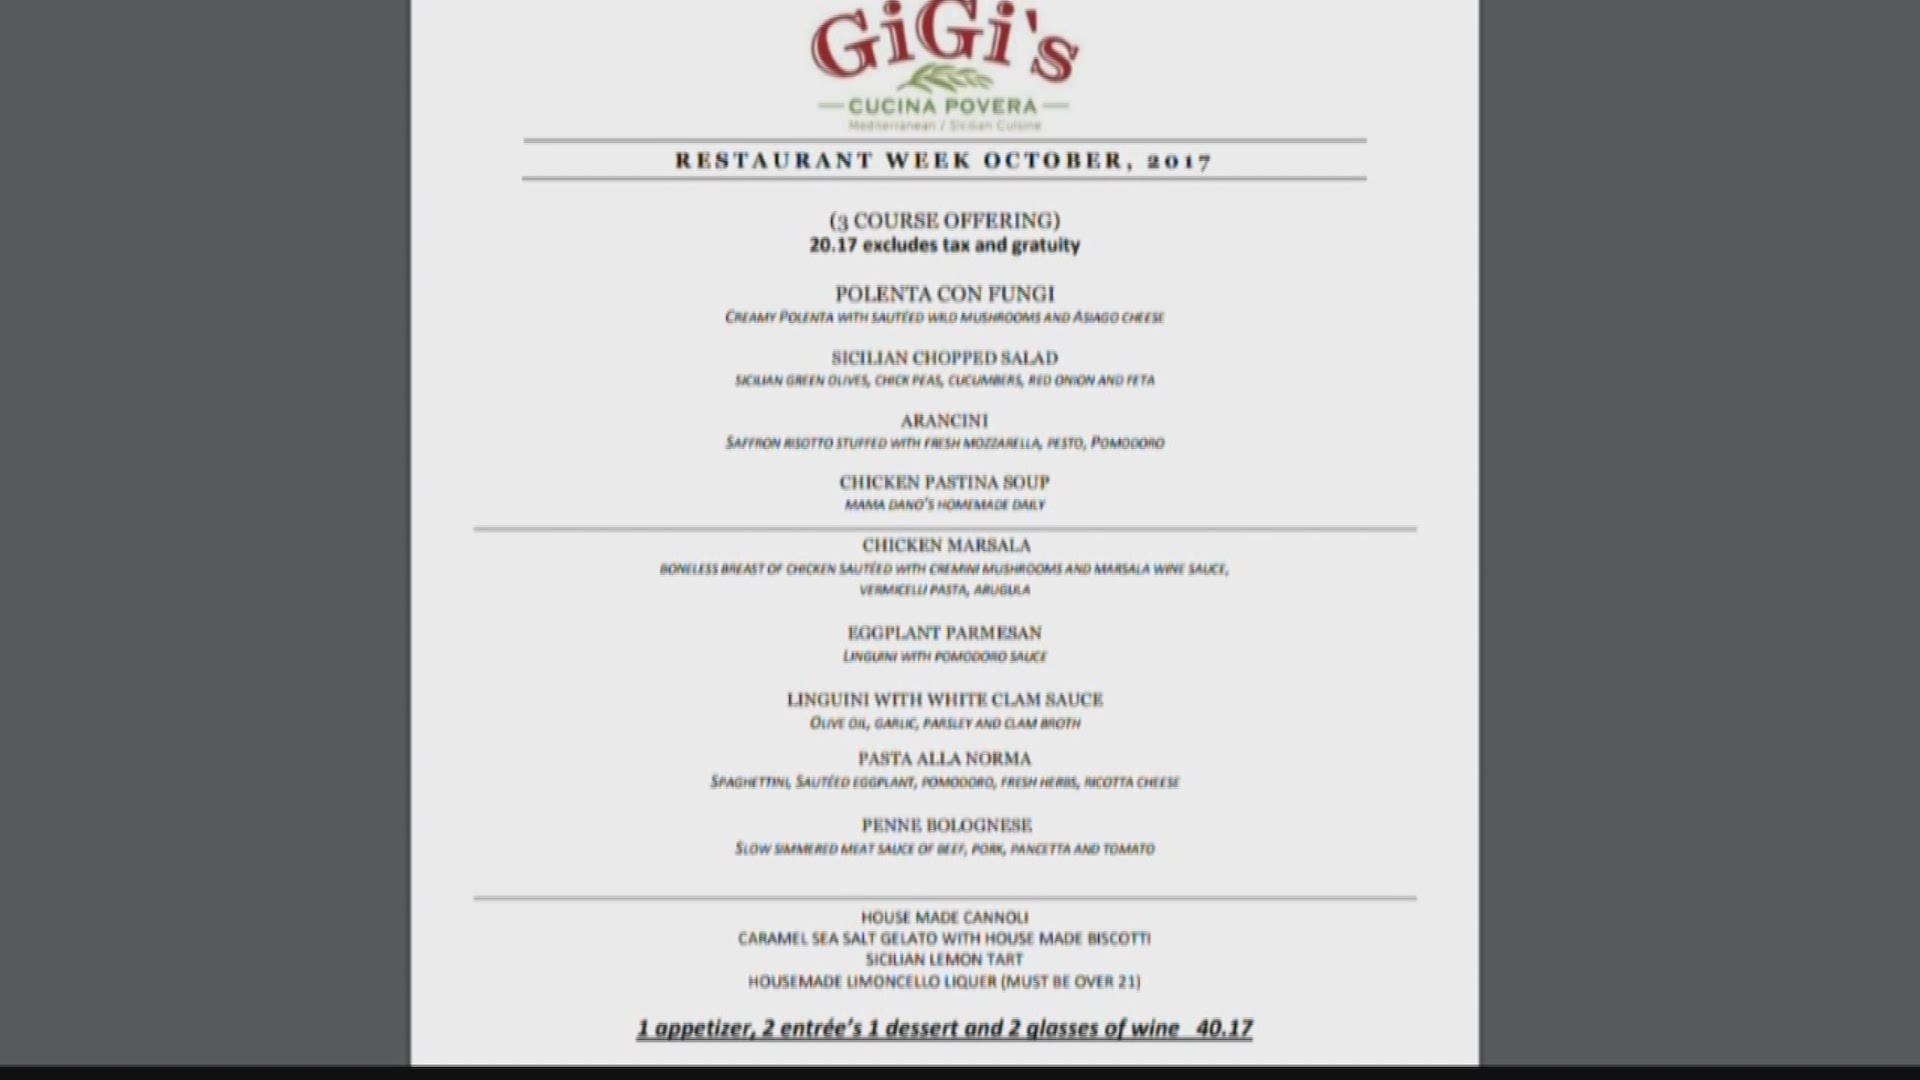 Gigi's is just one of many participating in local restaurant week